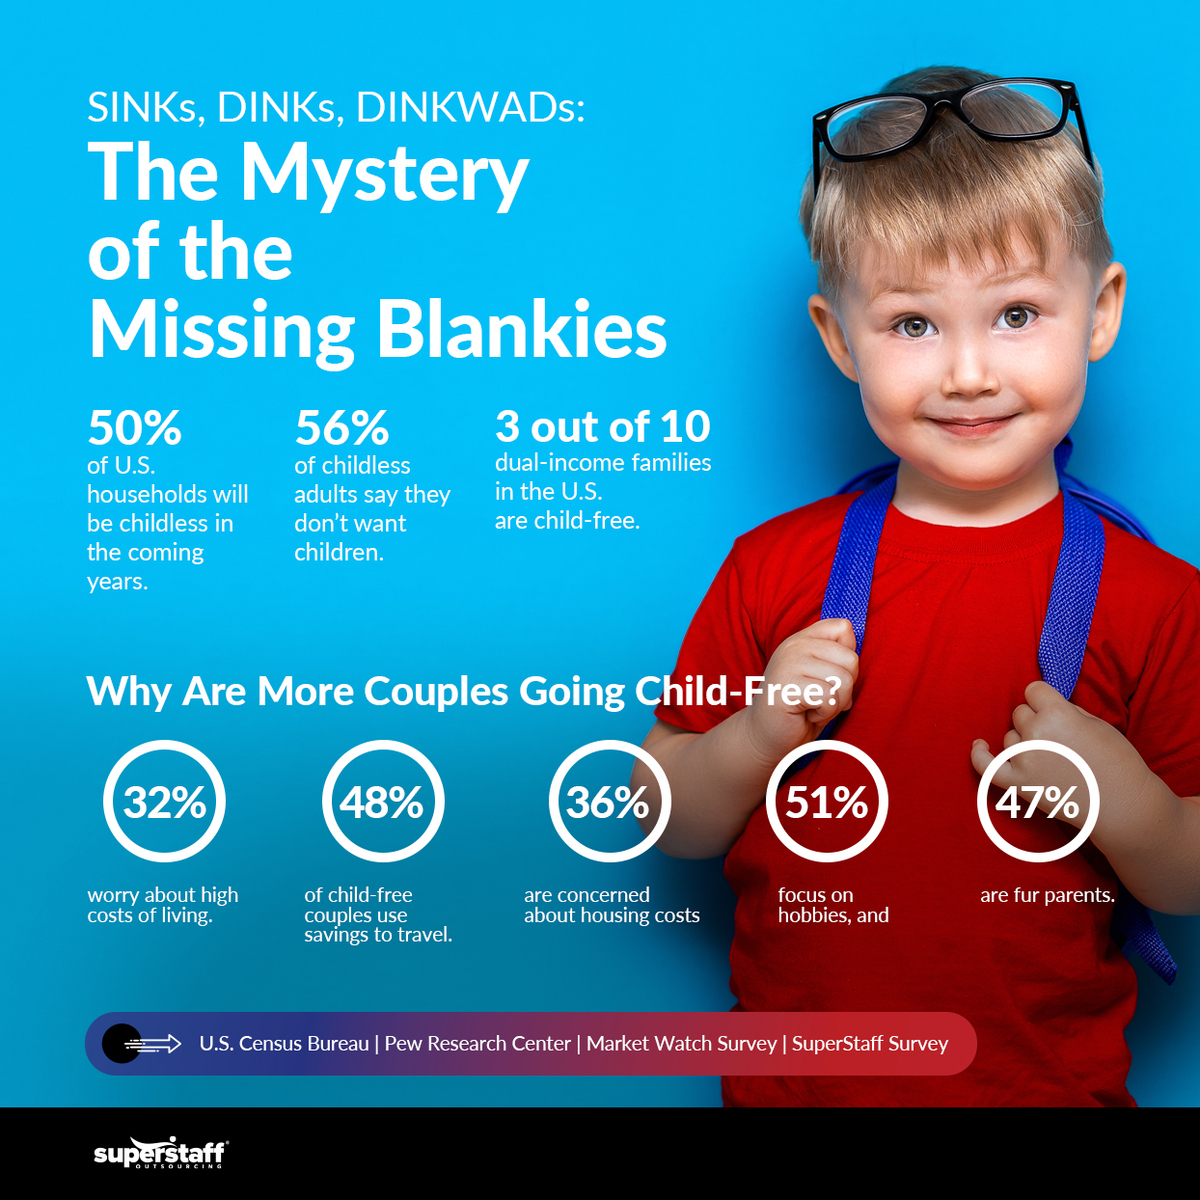 A kid wearing a red shirt smiles at the camera. The mini infographic outlines motivations behind DINK lifestyle.